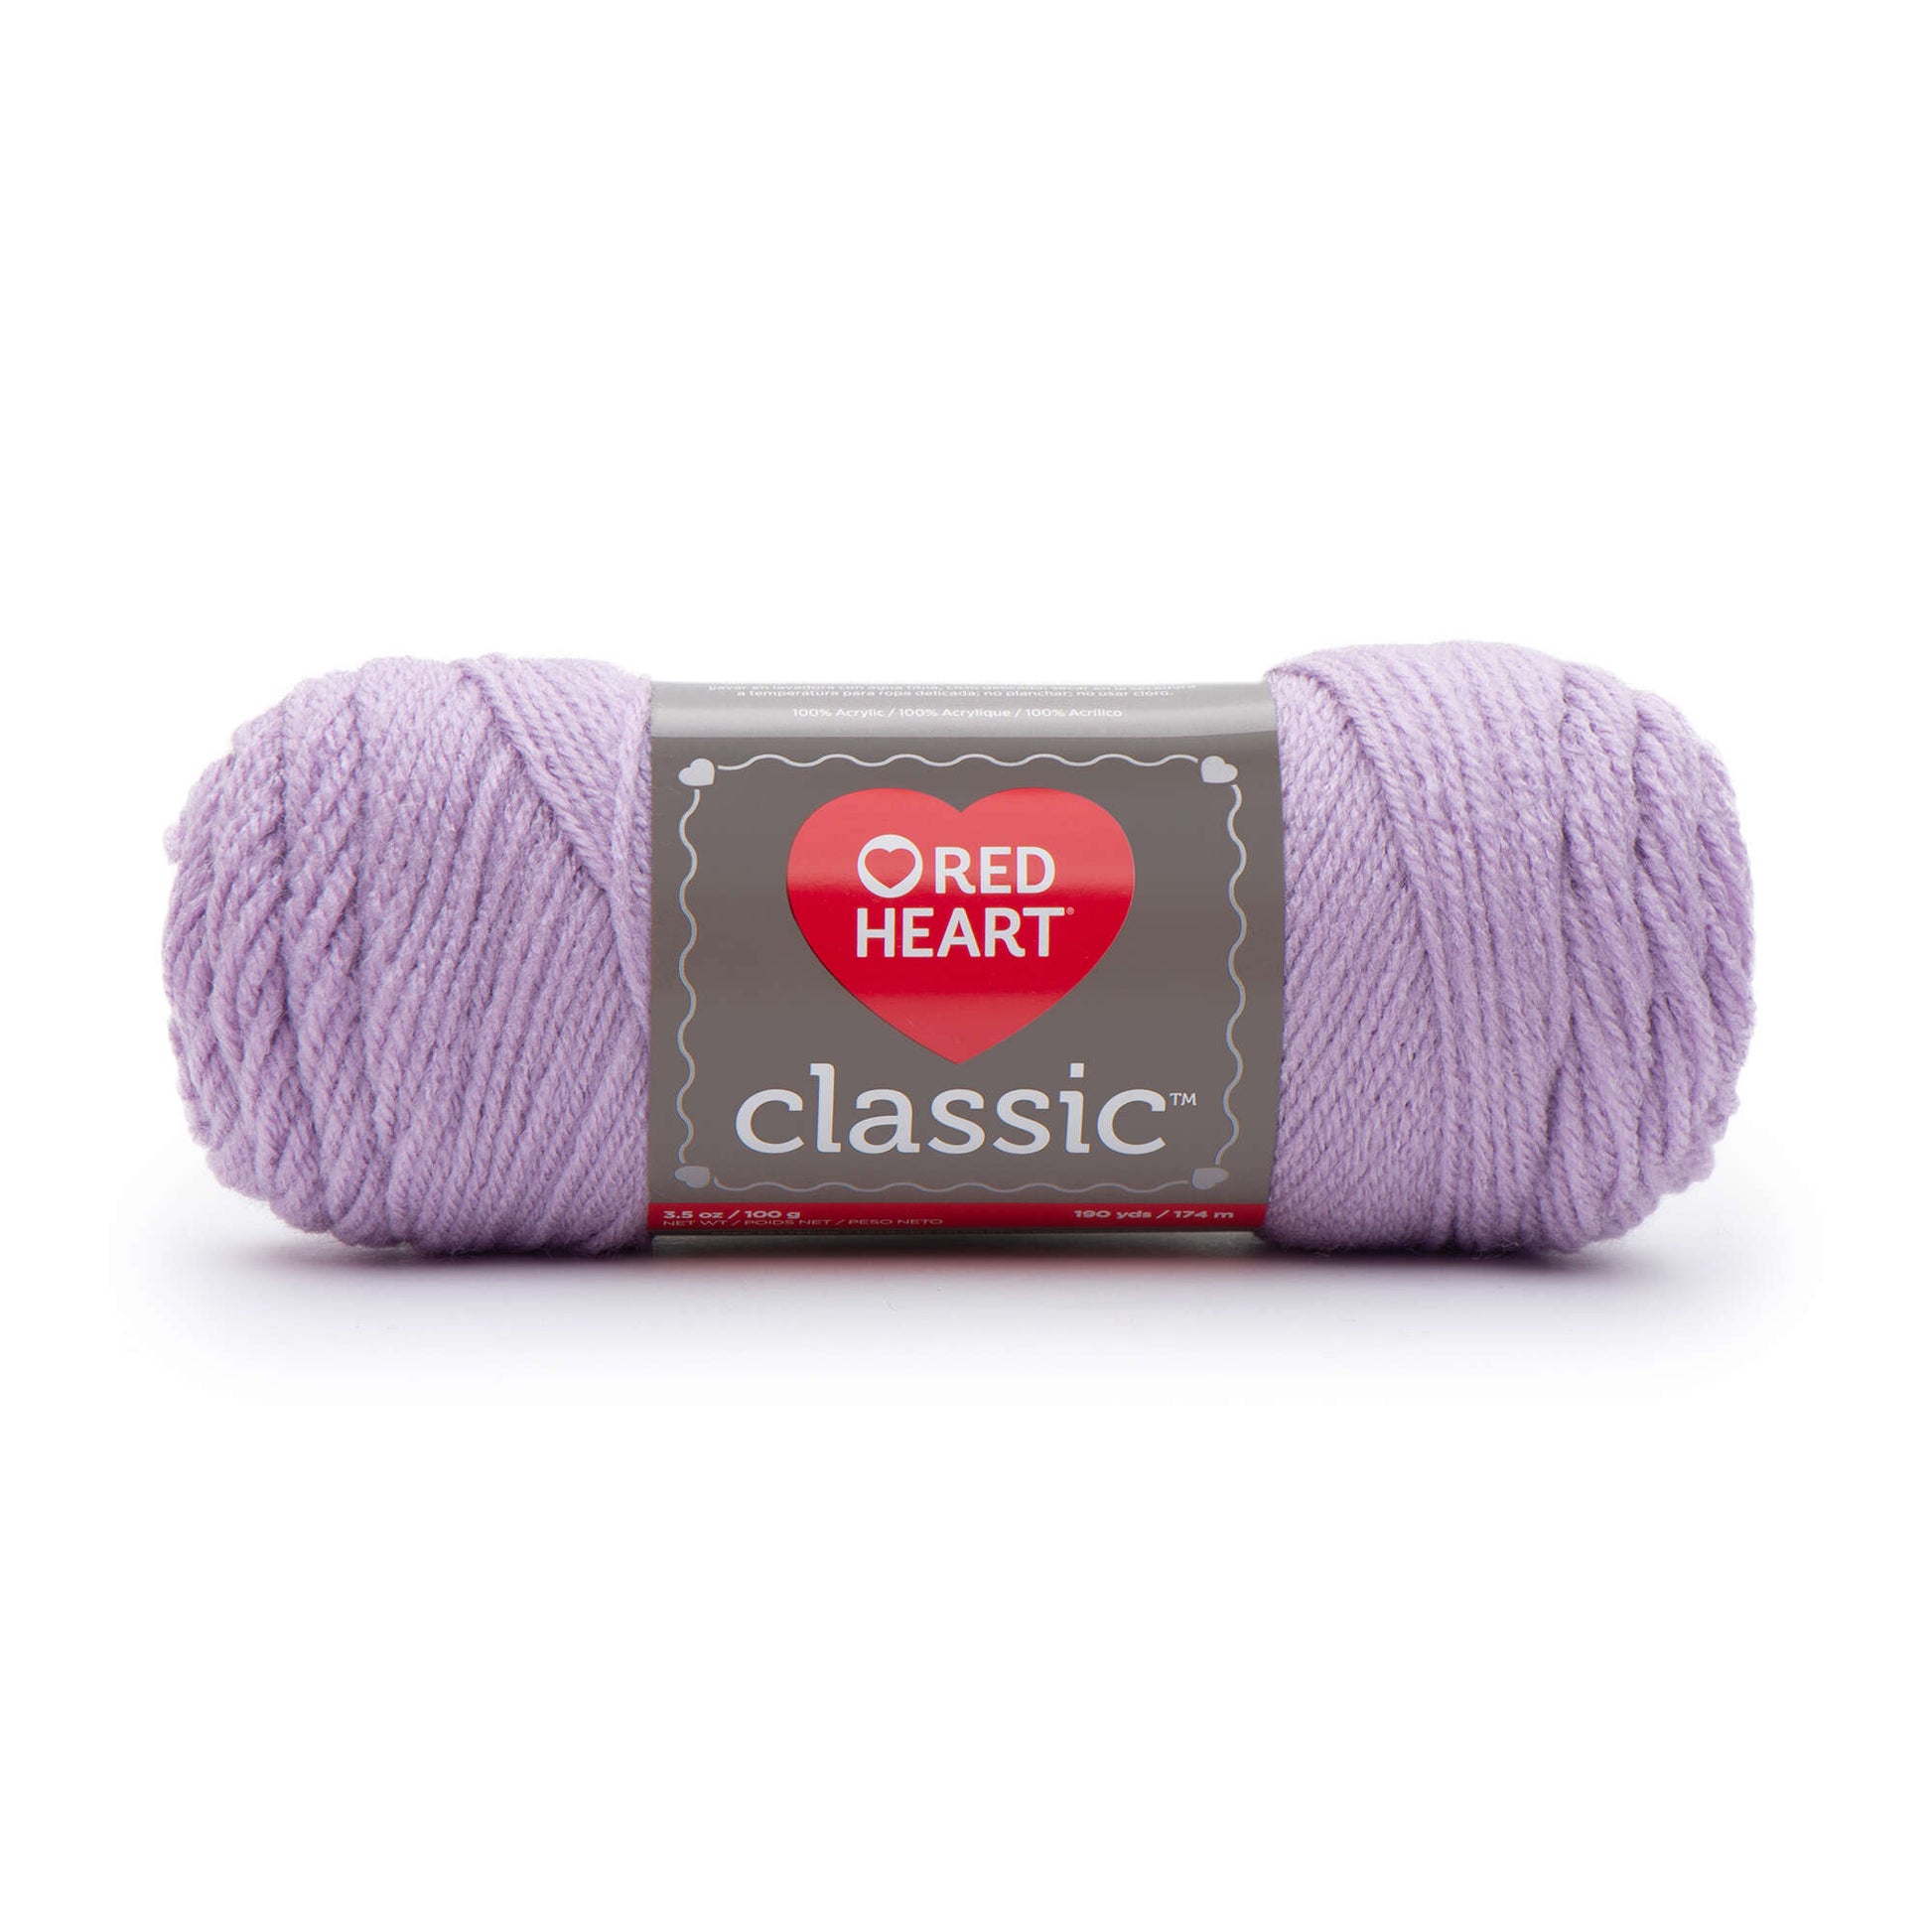 Red Heart Classic Yarn - Clearance shades Light Lavender